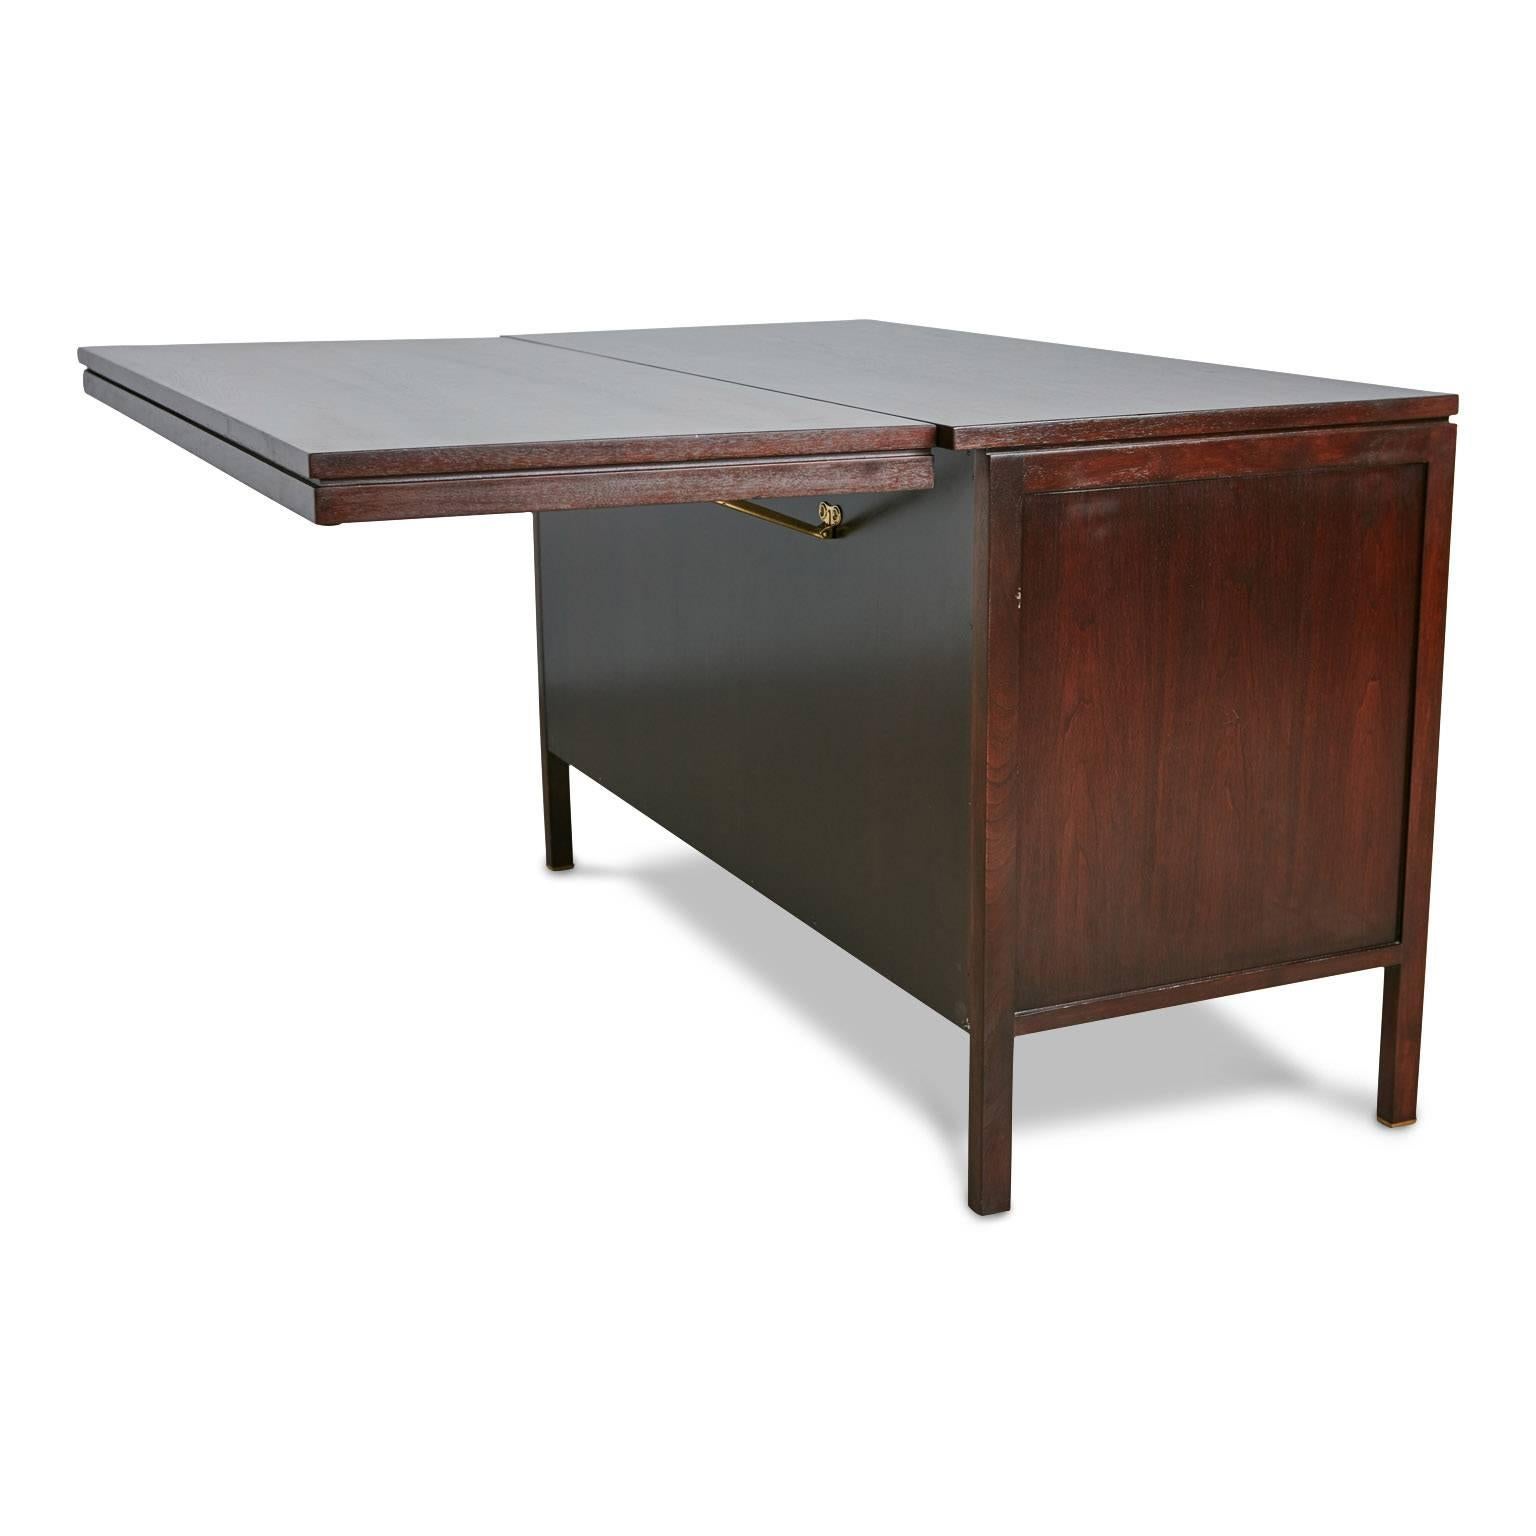 American Edward Wormley for Dunbar Tambour Credenza with Pop-Up Table, circa 1960